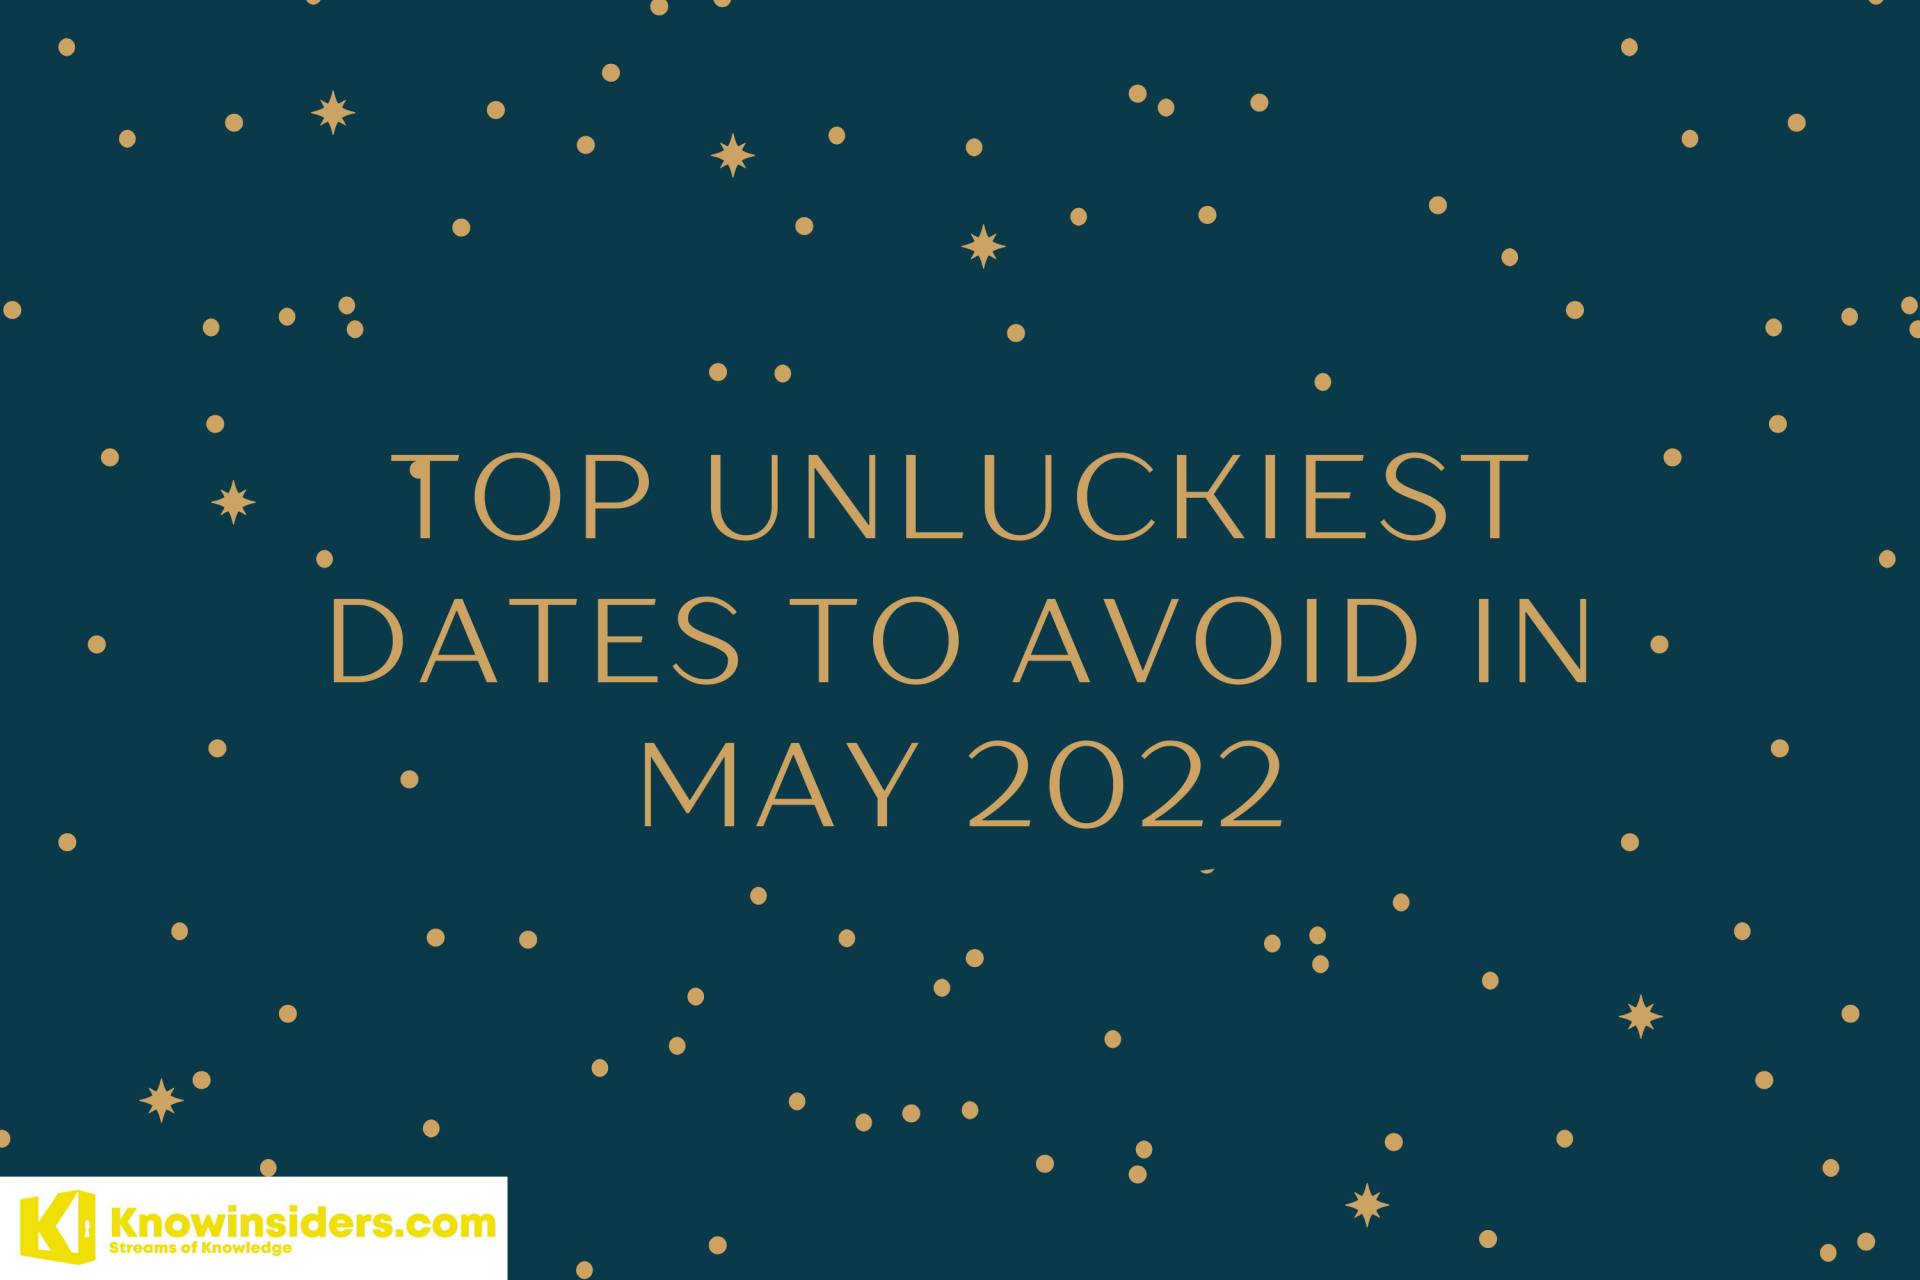 Top Unluckiest Dates To Avoid In May 2022